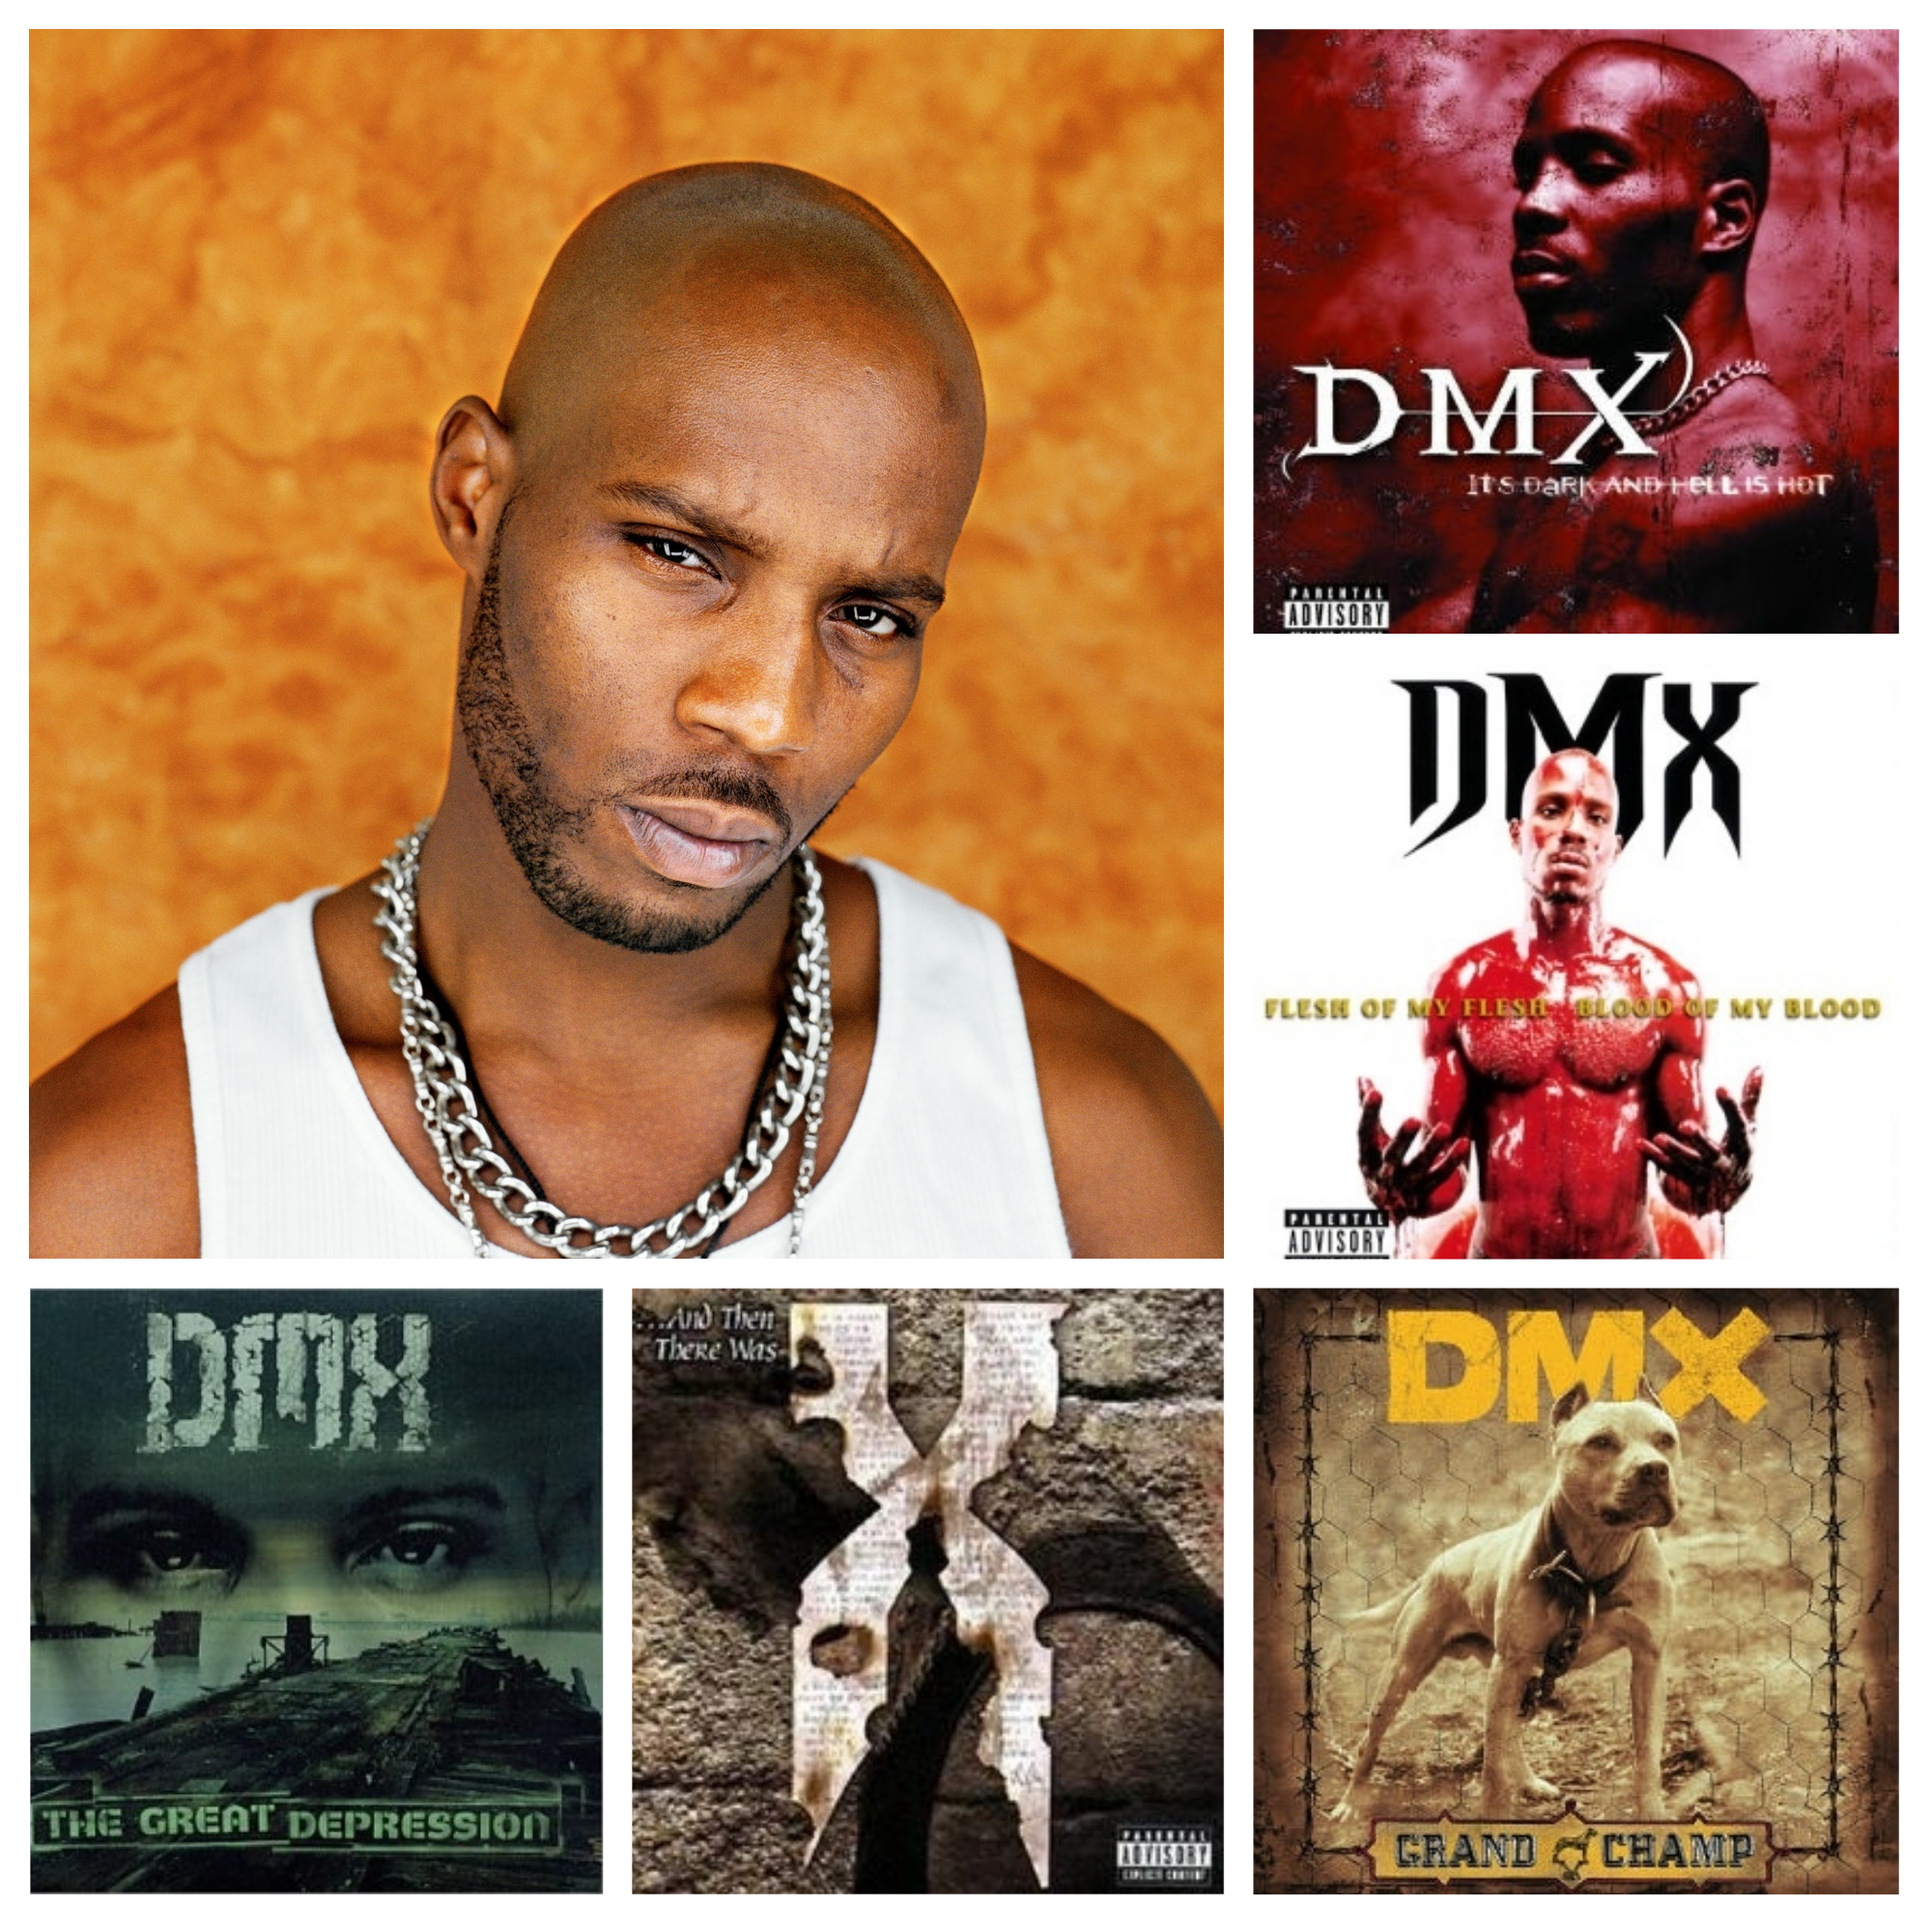 Chart Topping Rapper Earl Dmx Simmons Dies At 50 New York Amsterdam News The New Black View